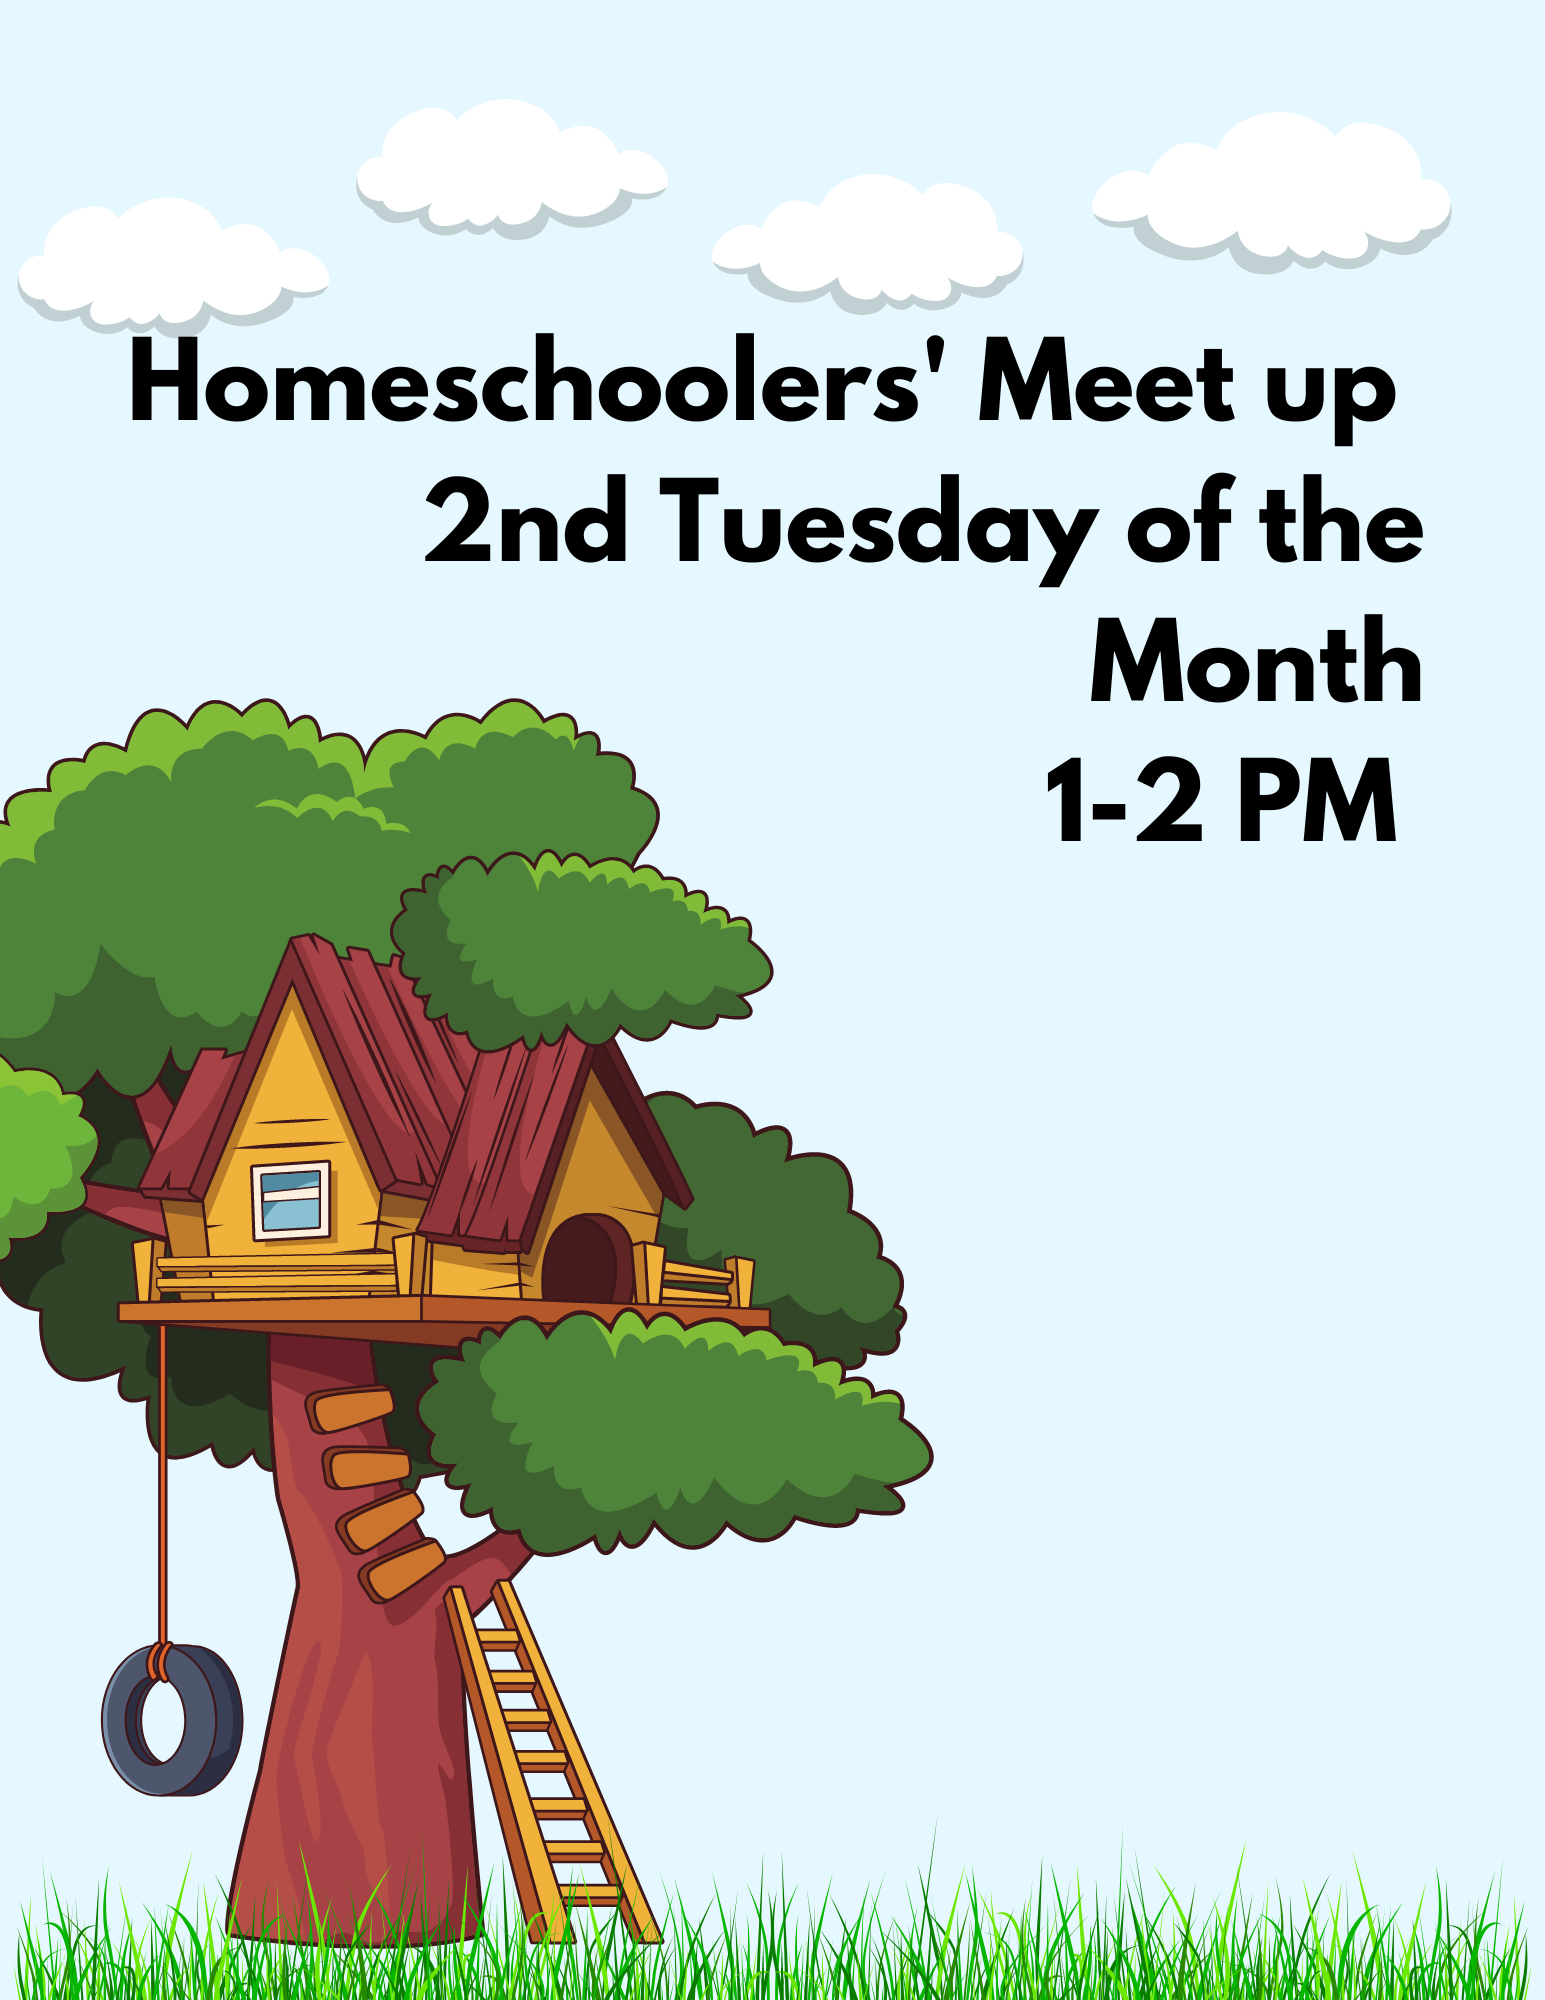 Homeschool Meet up with treehouse on blue background.